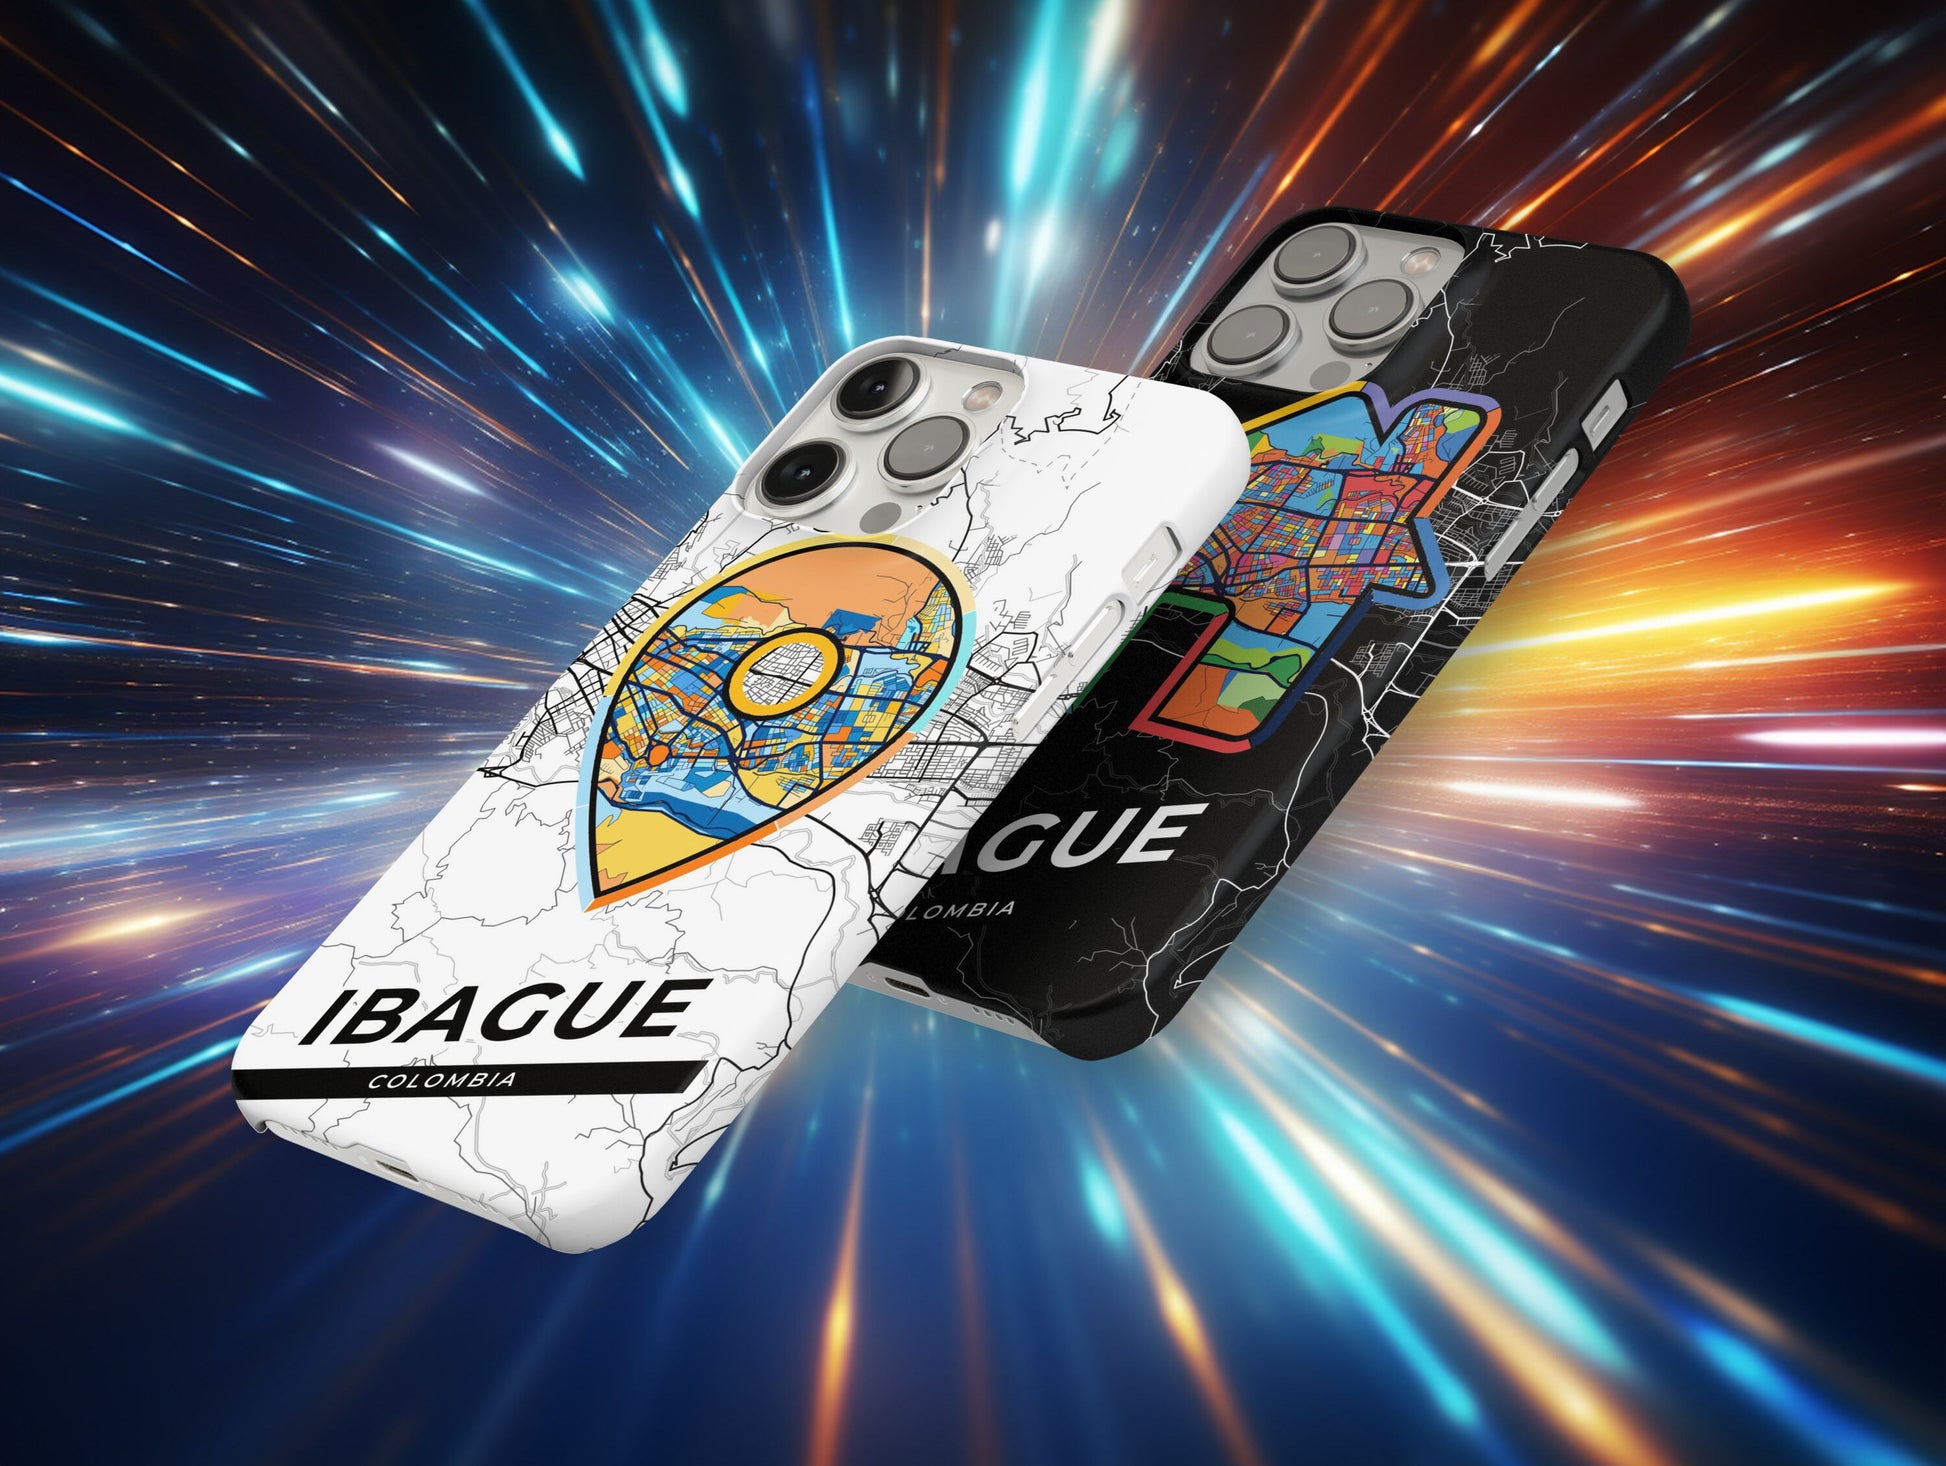 Ibague Colombia slim phone case with colorful icon. Birthday, wedding or housewarming gift. Couple match cases.